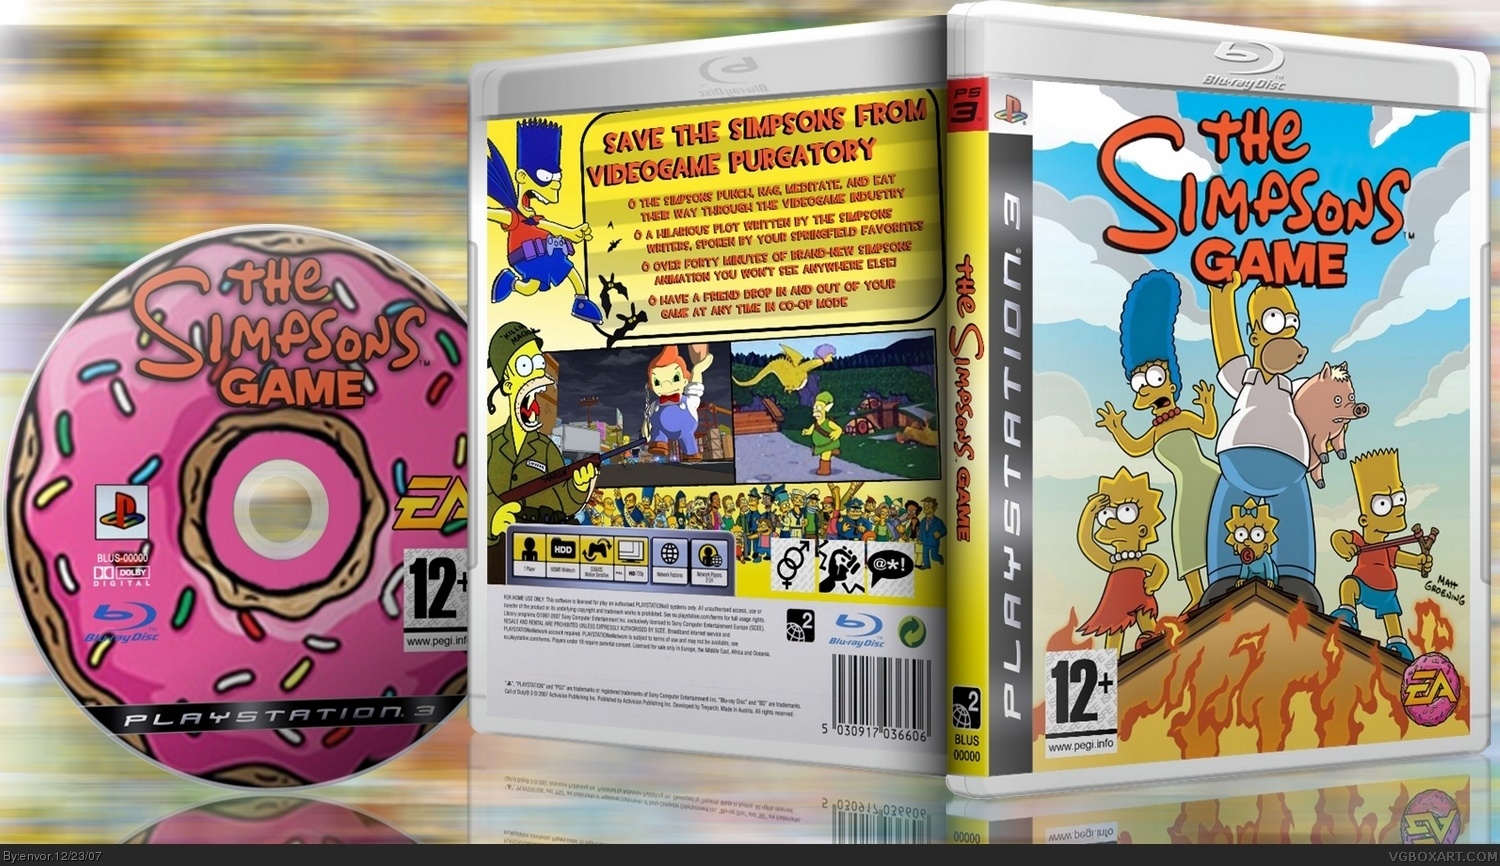 The Simpsons Game box cover